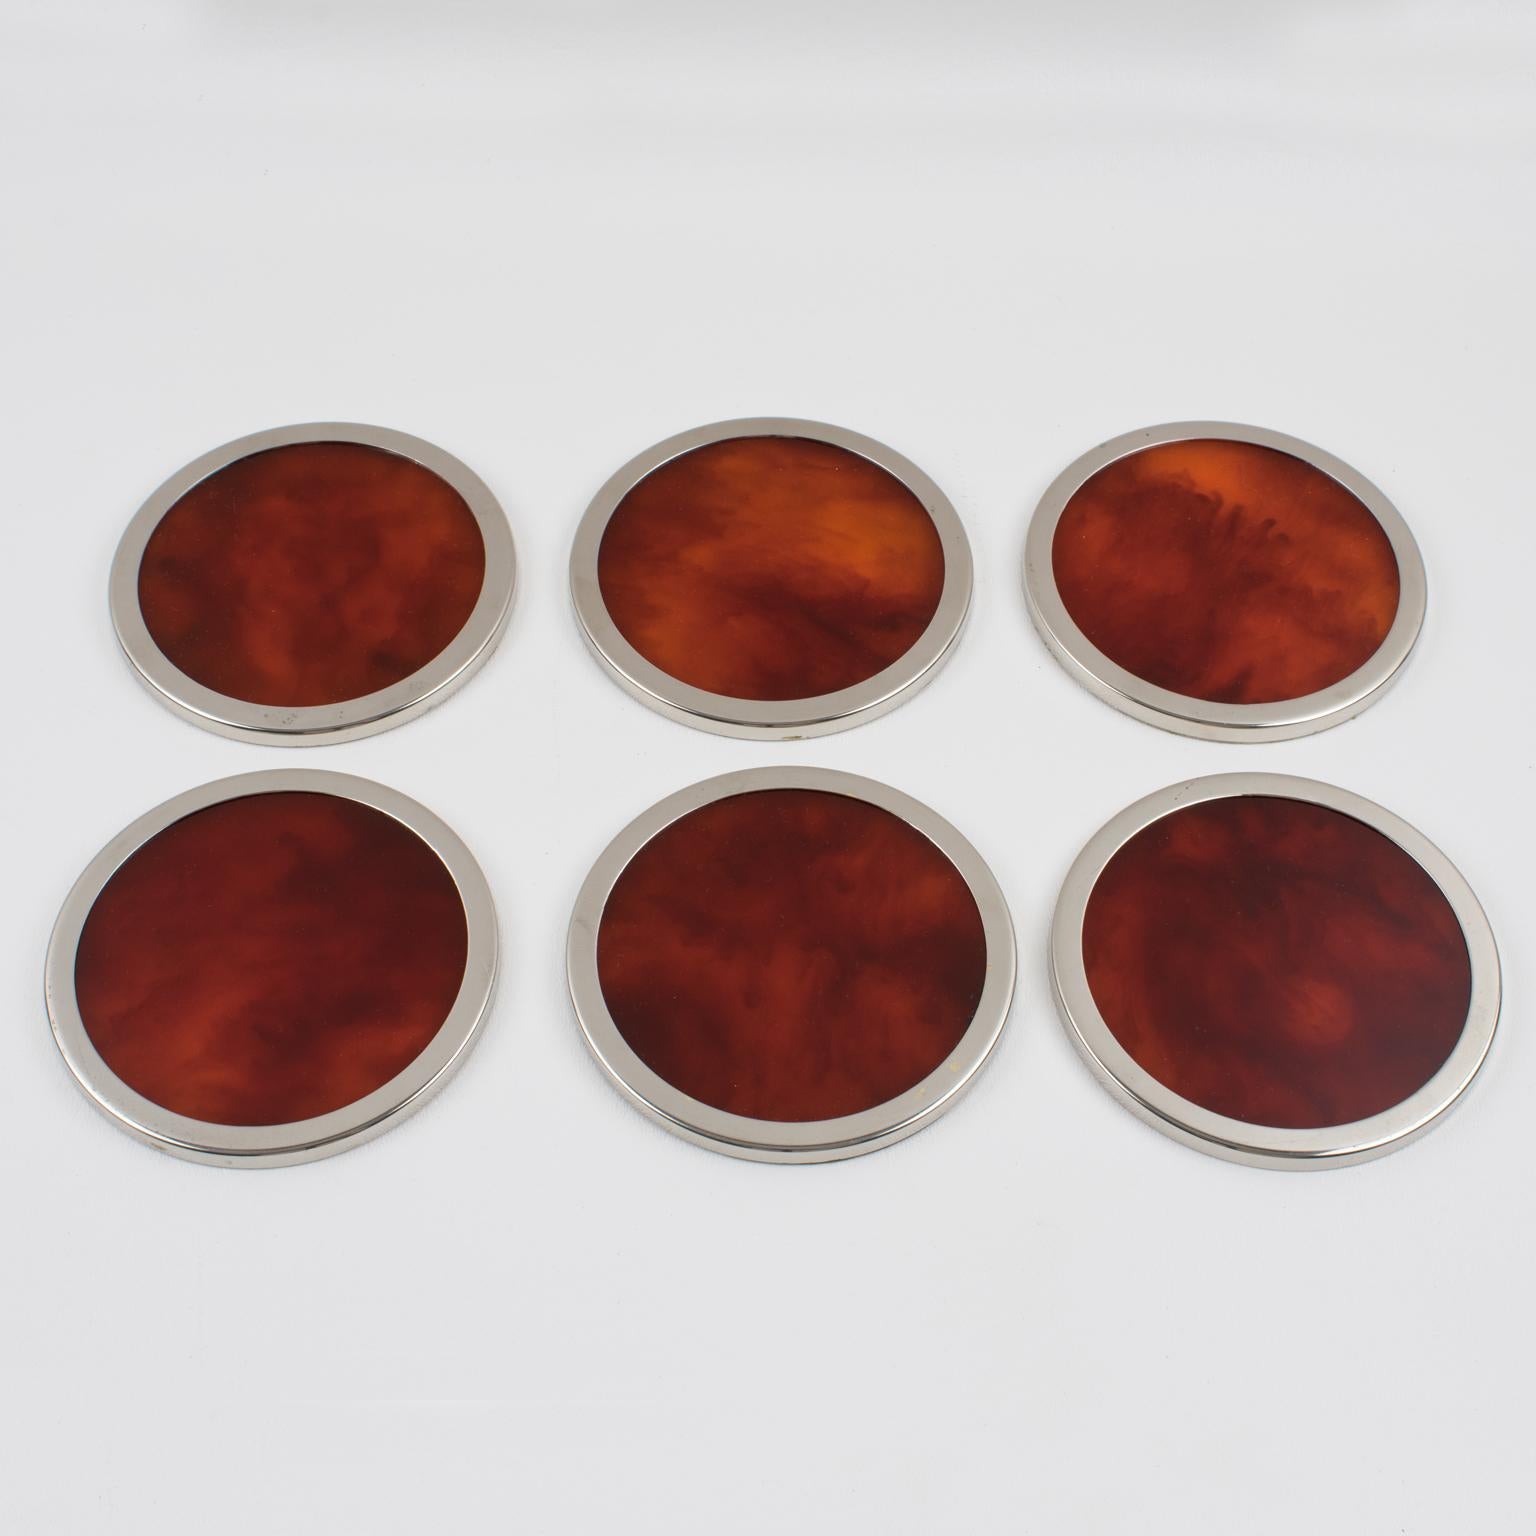 Lovely 1970s modernist barware set of six coasters, design attributed to Willy Rizzo. Rounded shape with tortoiseshell translucent Lucite and chromed metal framing.
Measurements: 3.94 in. diameter (10 cm) x 0.19 in. high (0.5 cm).